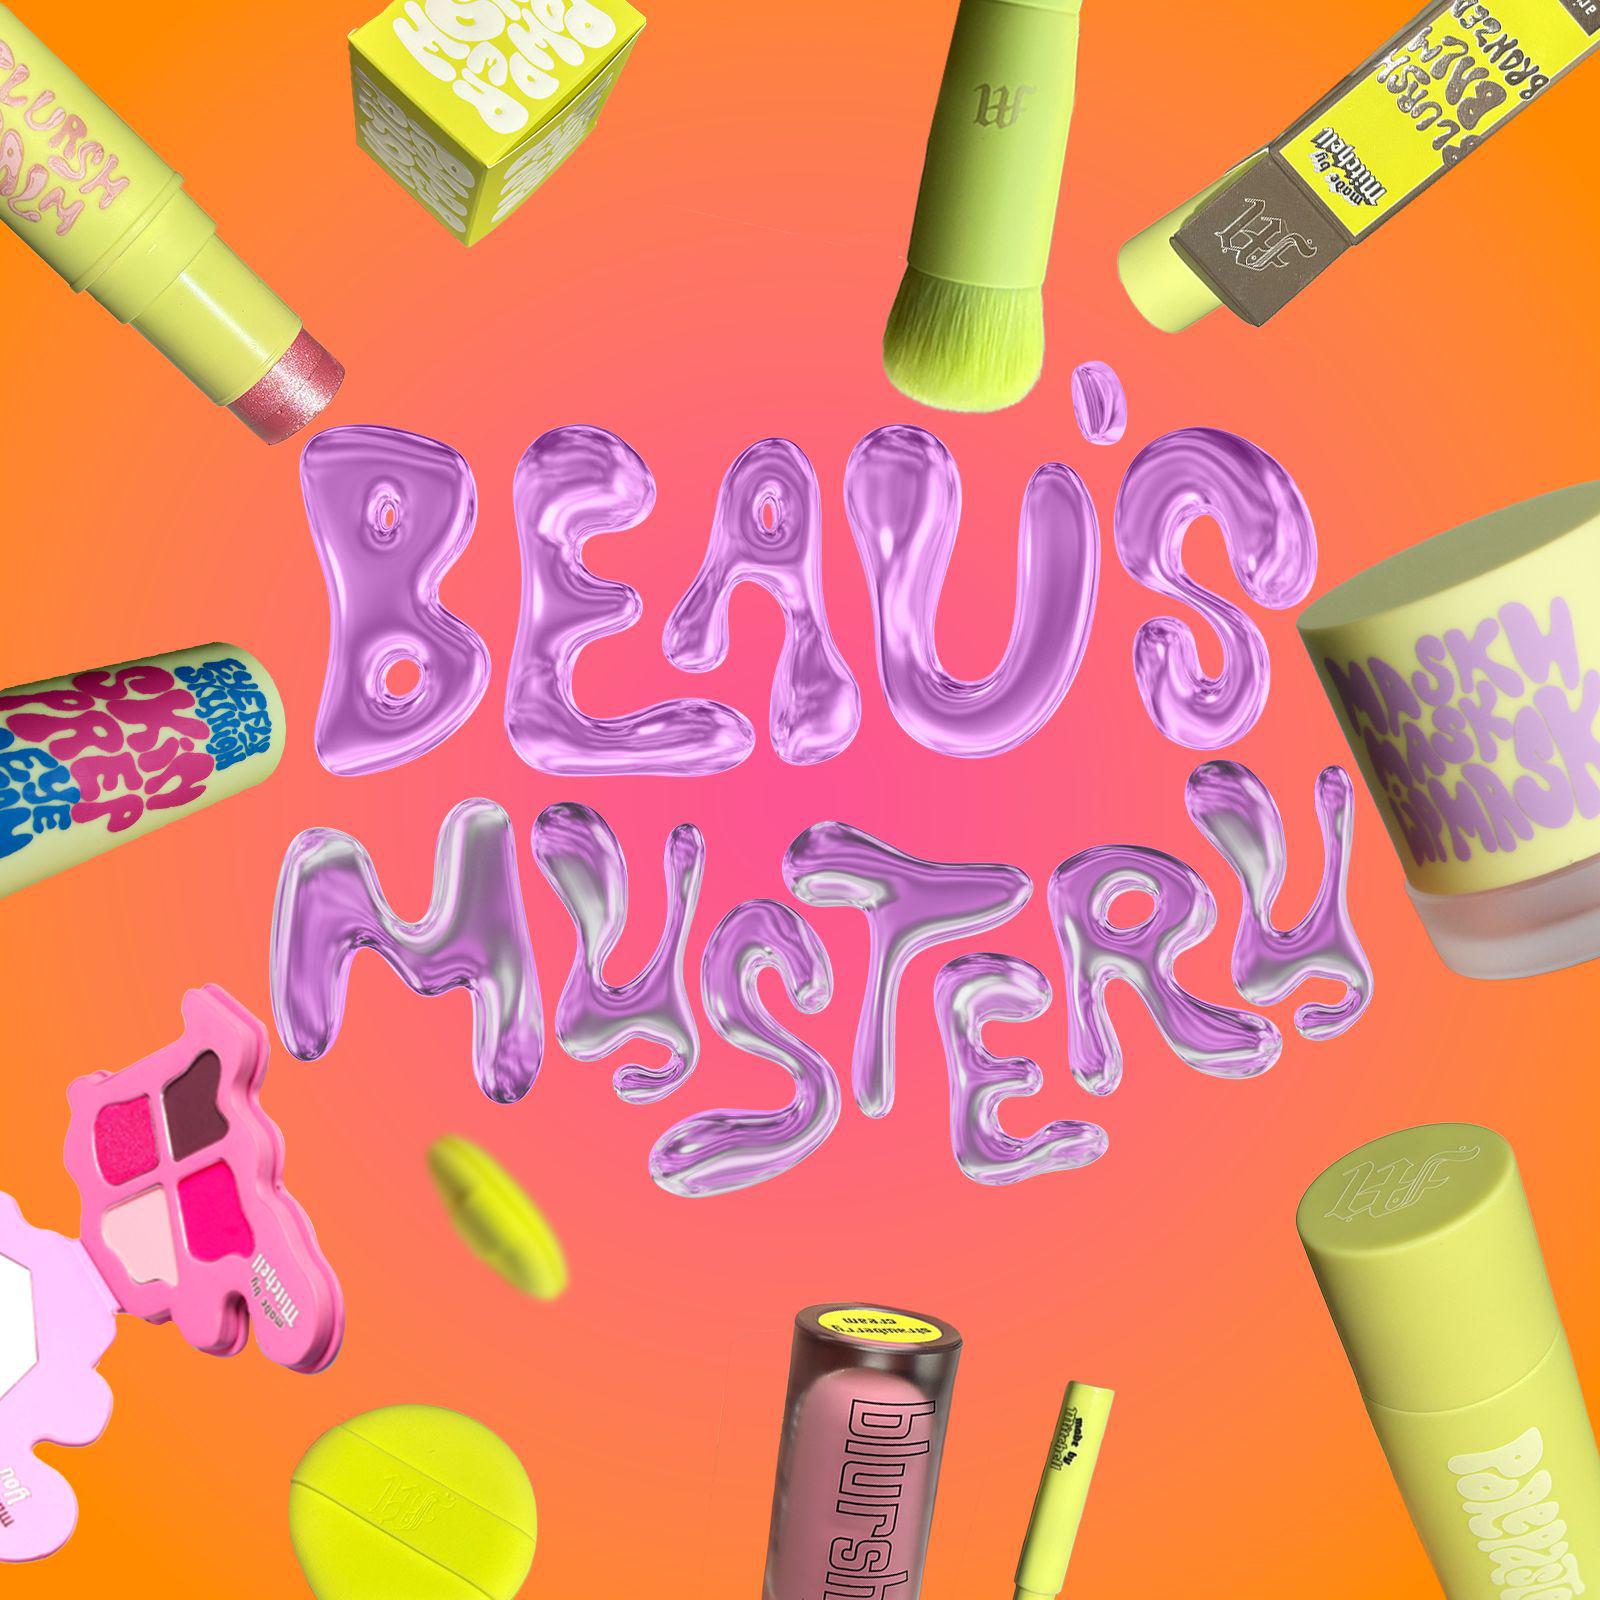 Beau's Makeup Mystery - Made By Mitchell